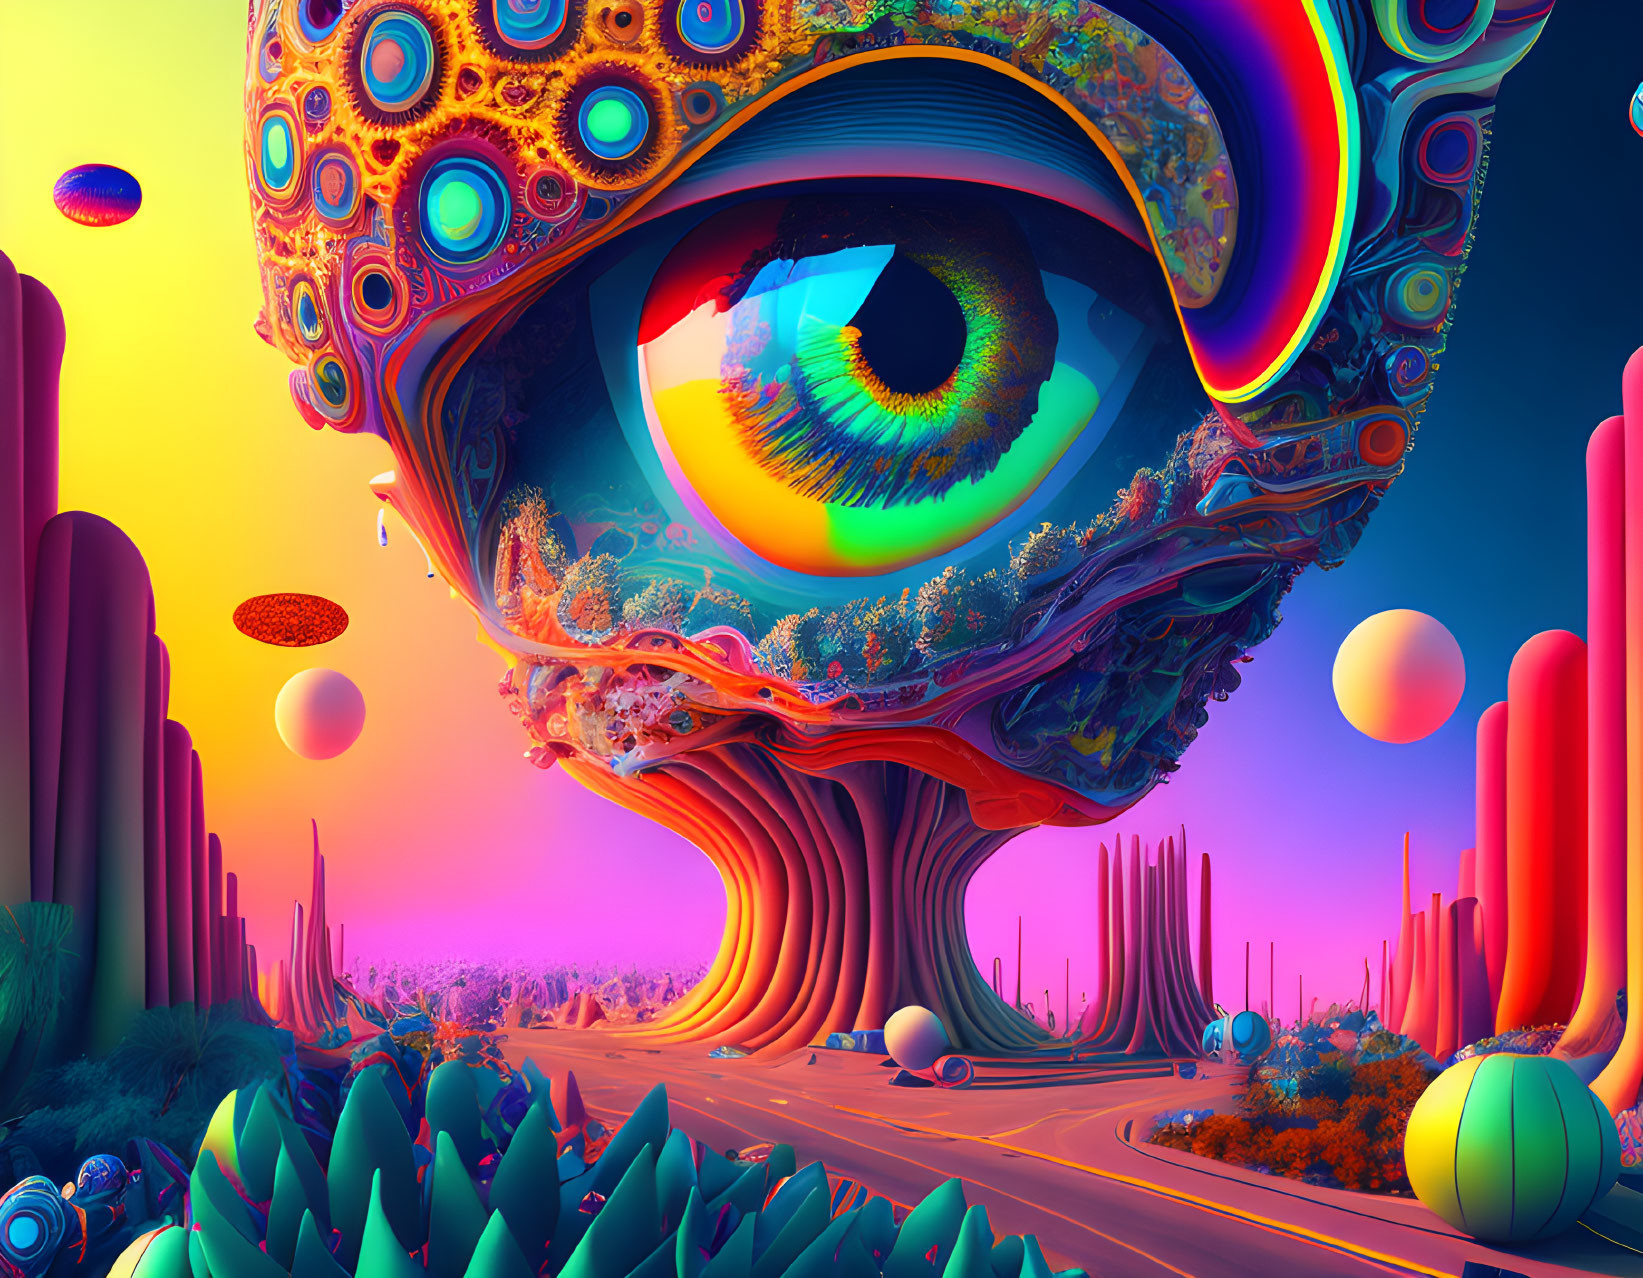 Colorful psychedelic landscape with eye-shaped structure and rainbow sky